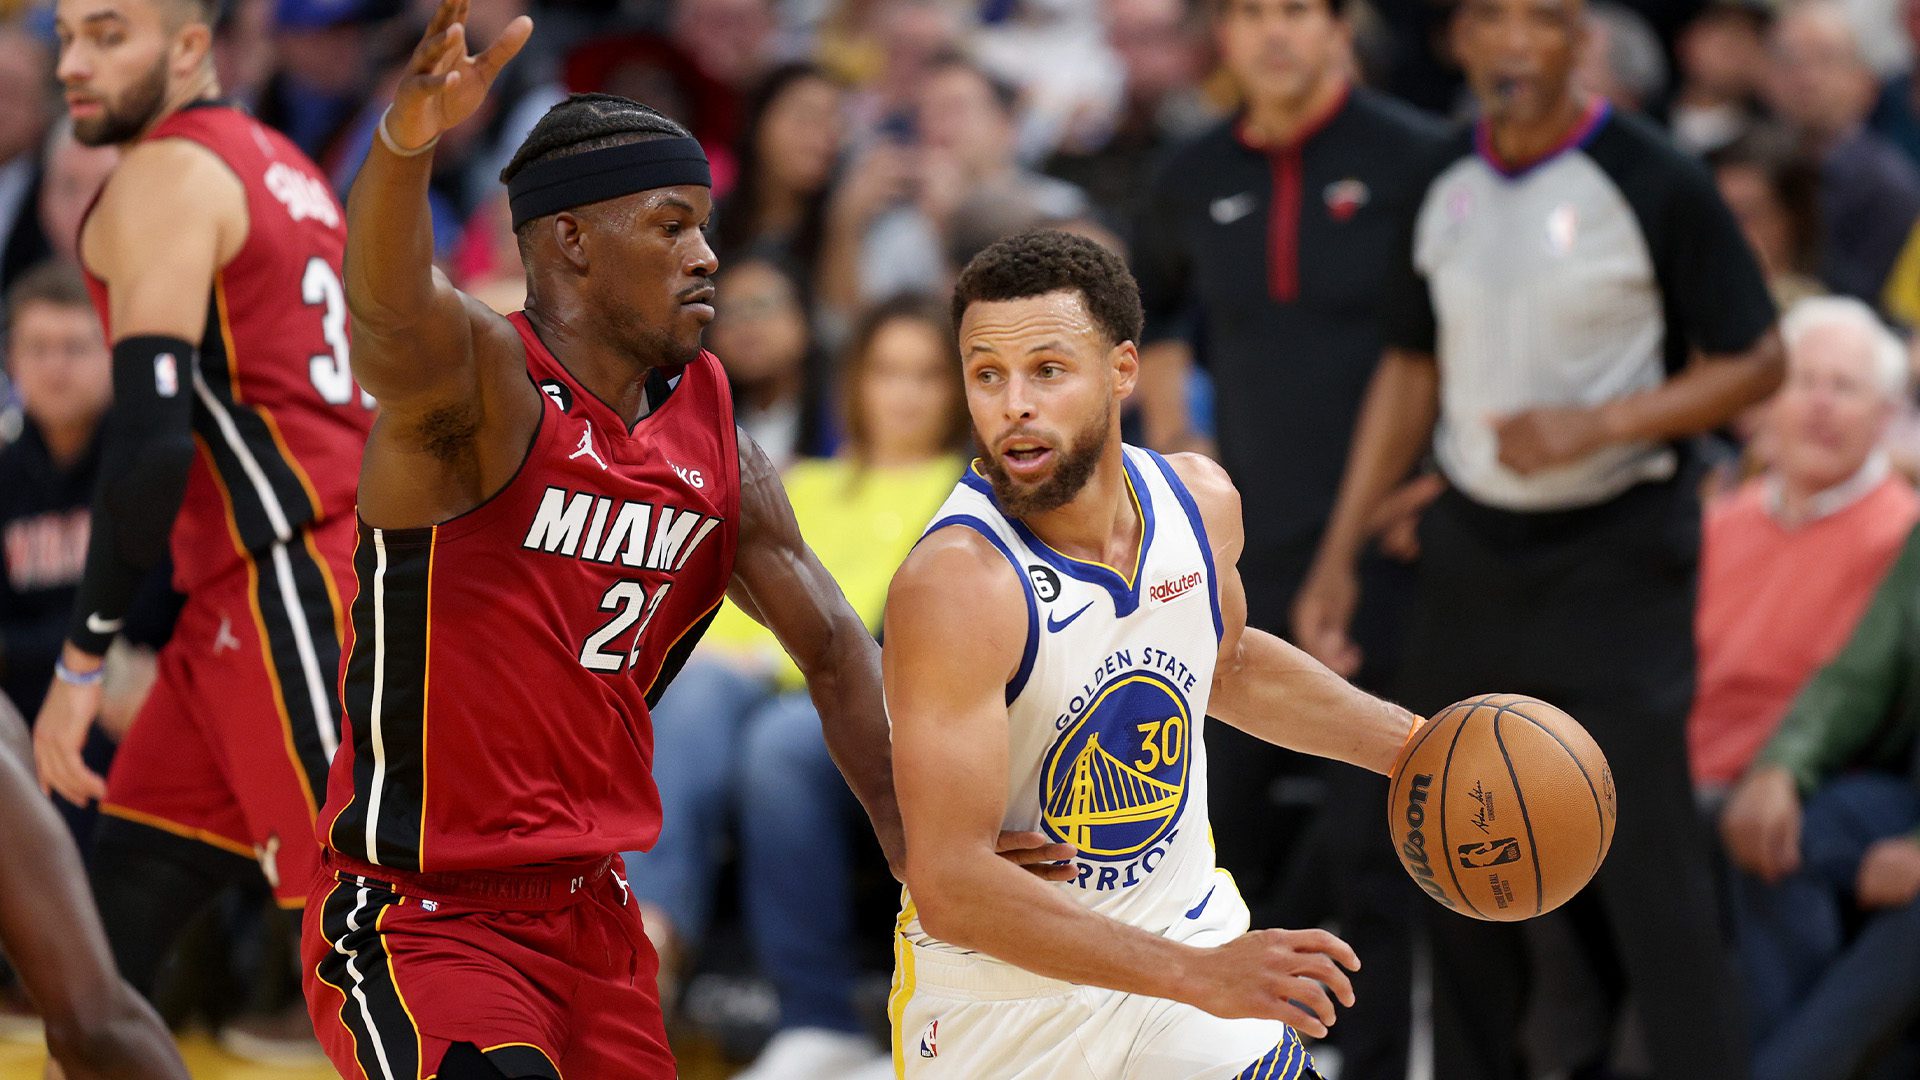 Warriors Fall to Heat in Tough Loss to Record 3-5